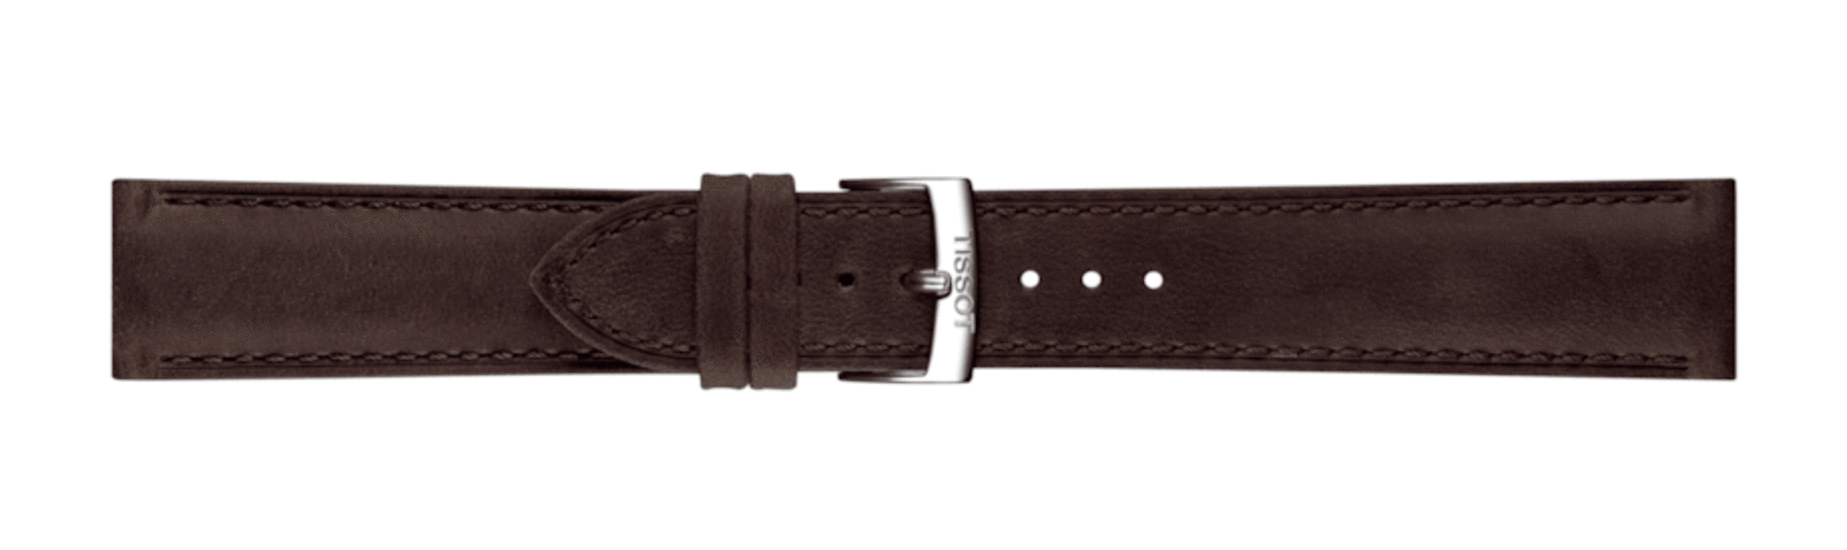 TISSOT OFFICIAL BROWN LEATHER STRAP 20 MM T852.049.057